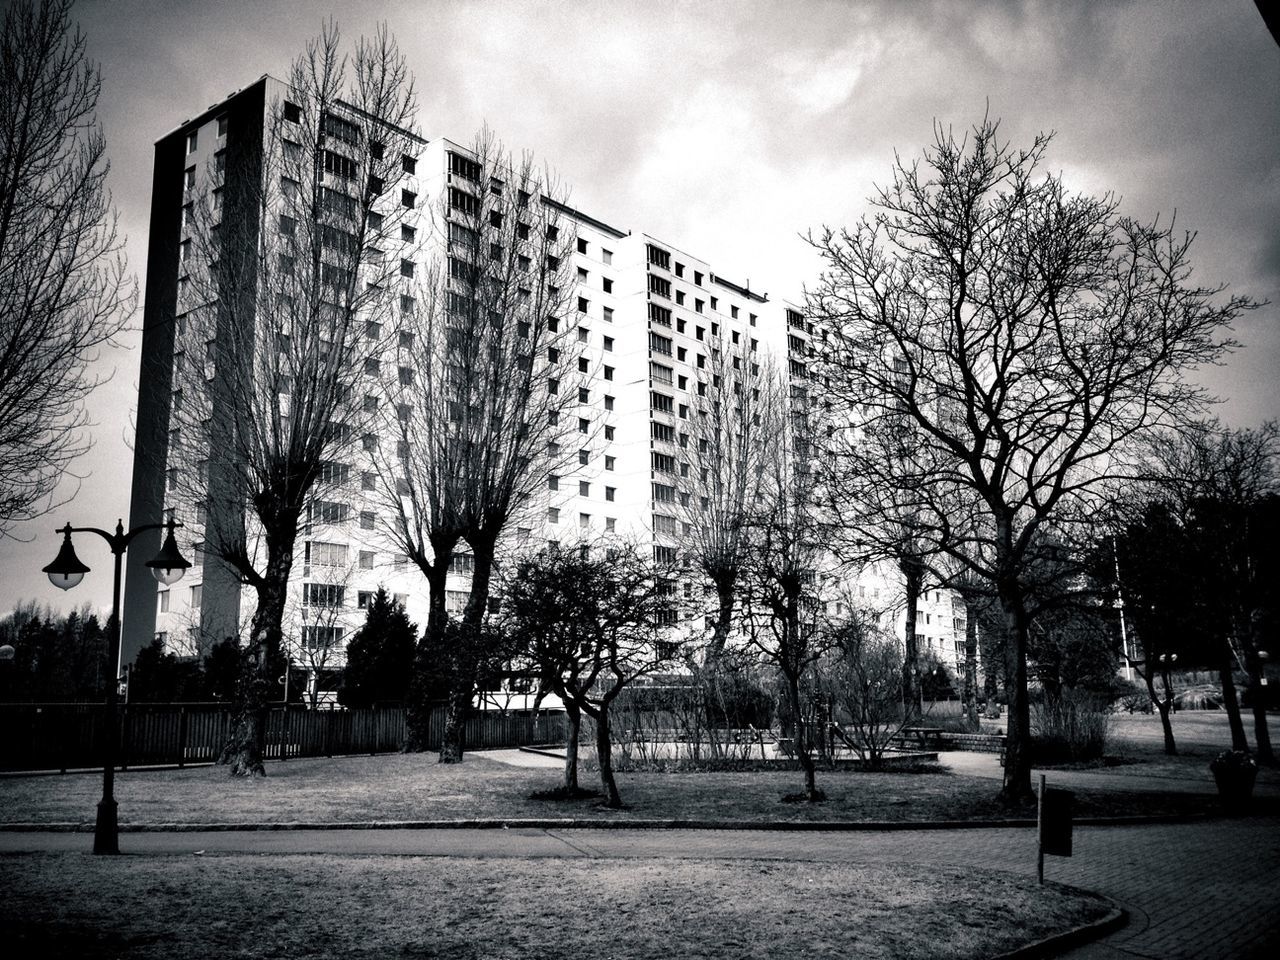 Residential block seen from park